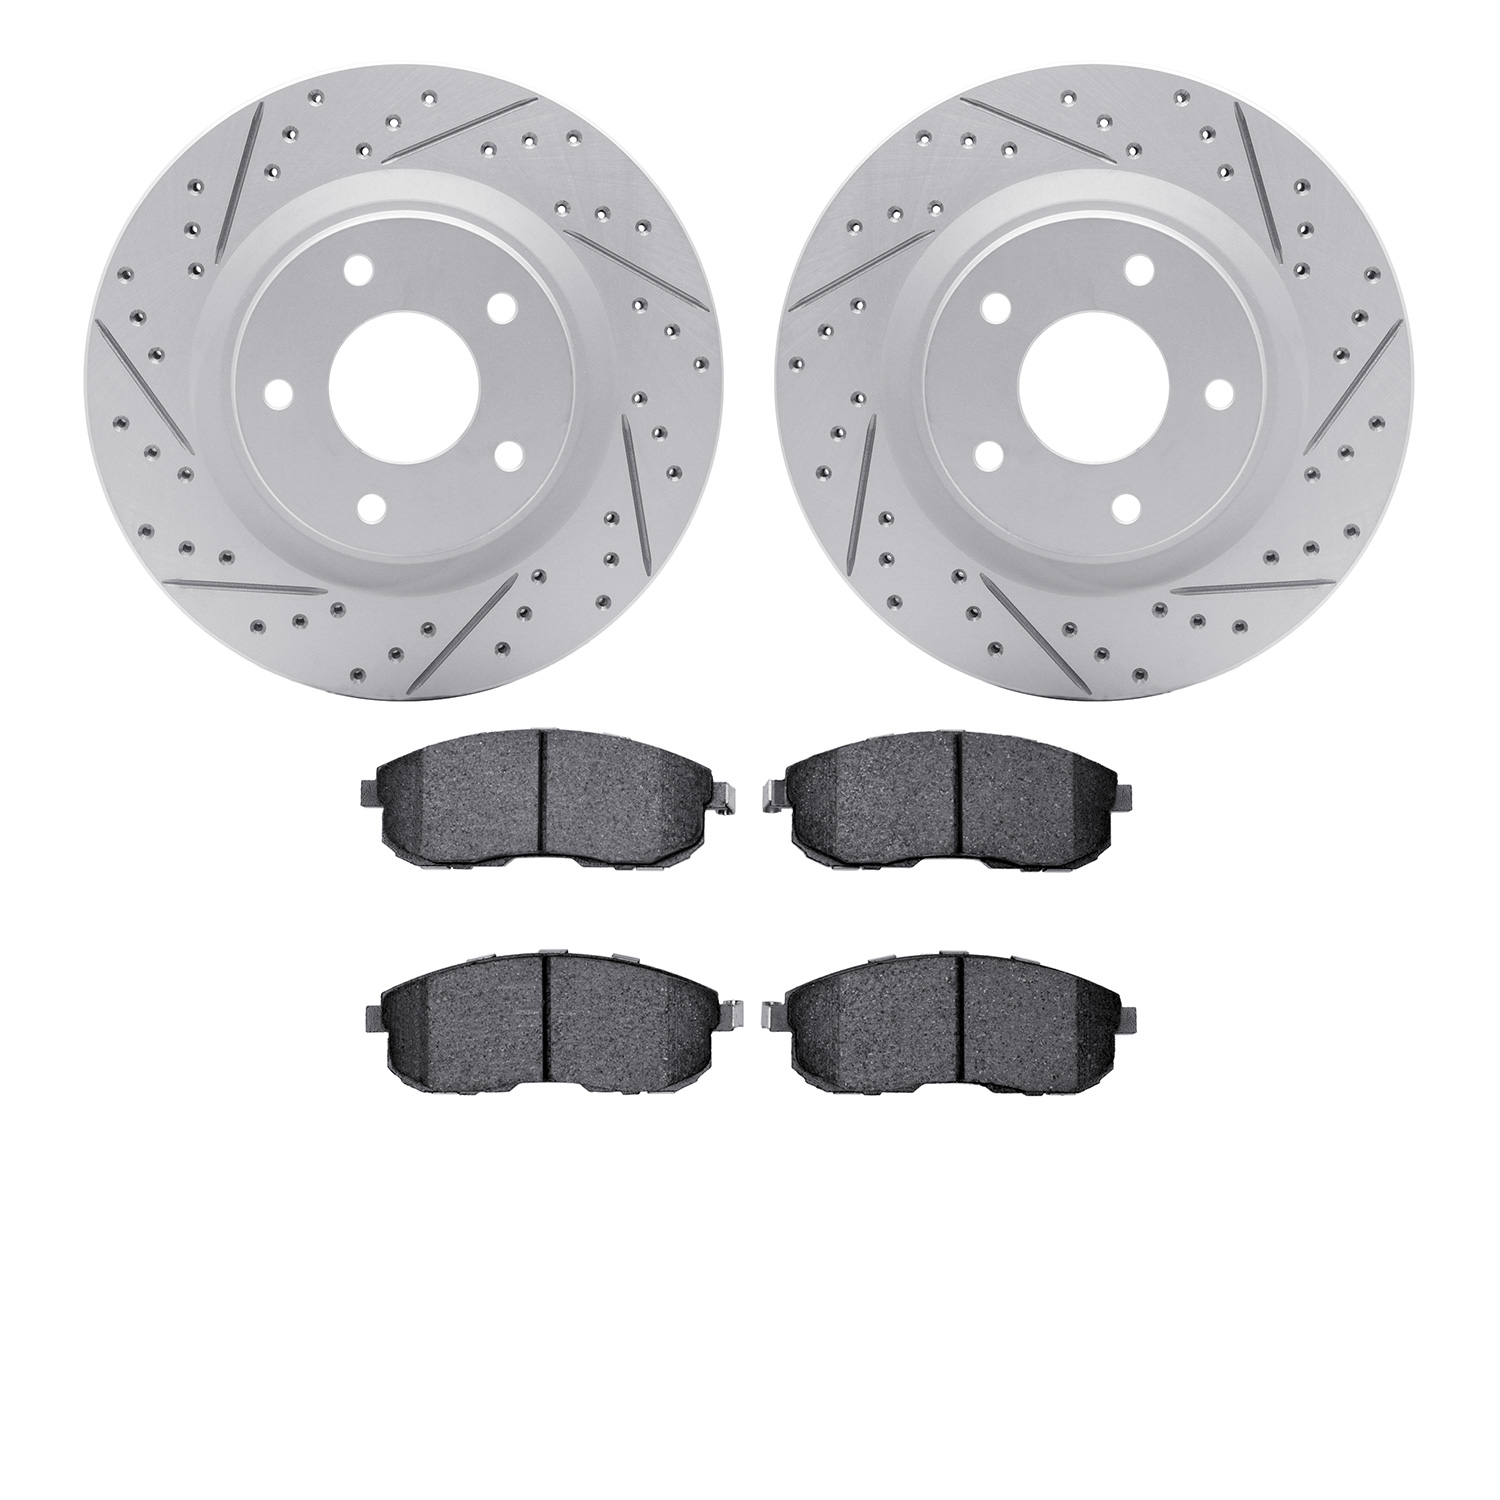 2602-67036 Geoperformance Drilled/Slotted Rotors w/5000 Euro Ceramic Brake Pads Kit, 2011-2019 Infiniti/Nissan, Position: Front